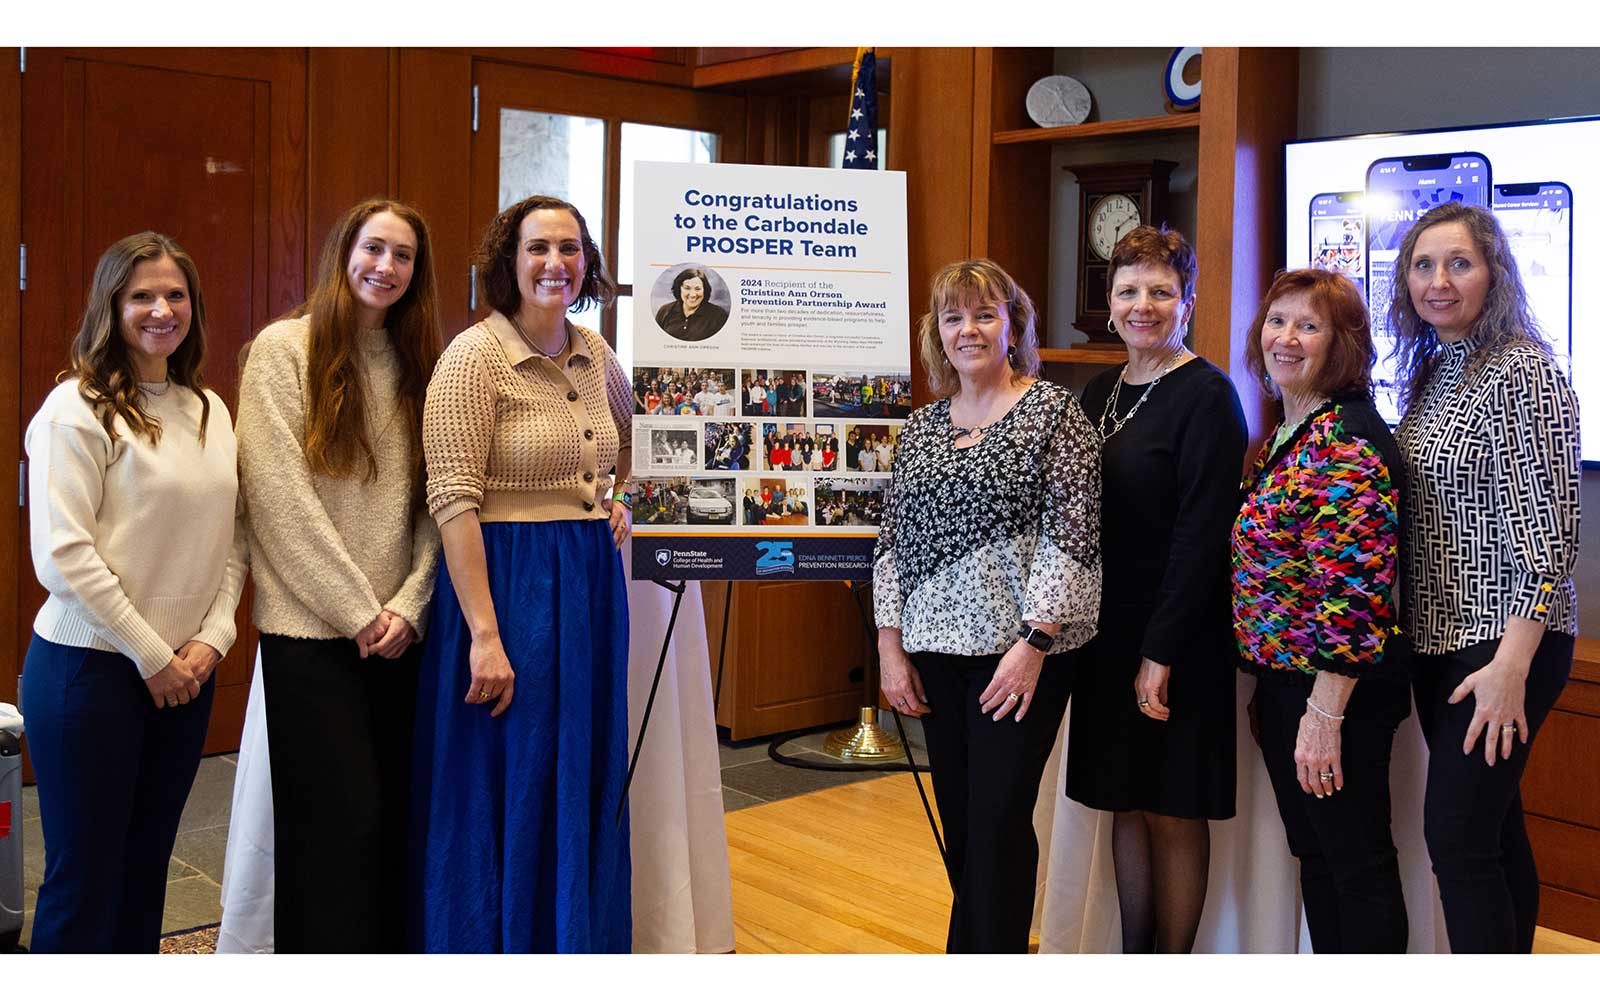 7 smiling woman standing next to a poster announcing the Carbondale PROSPER award